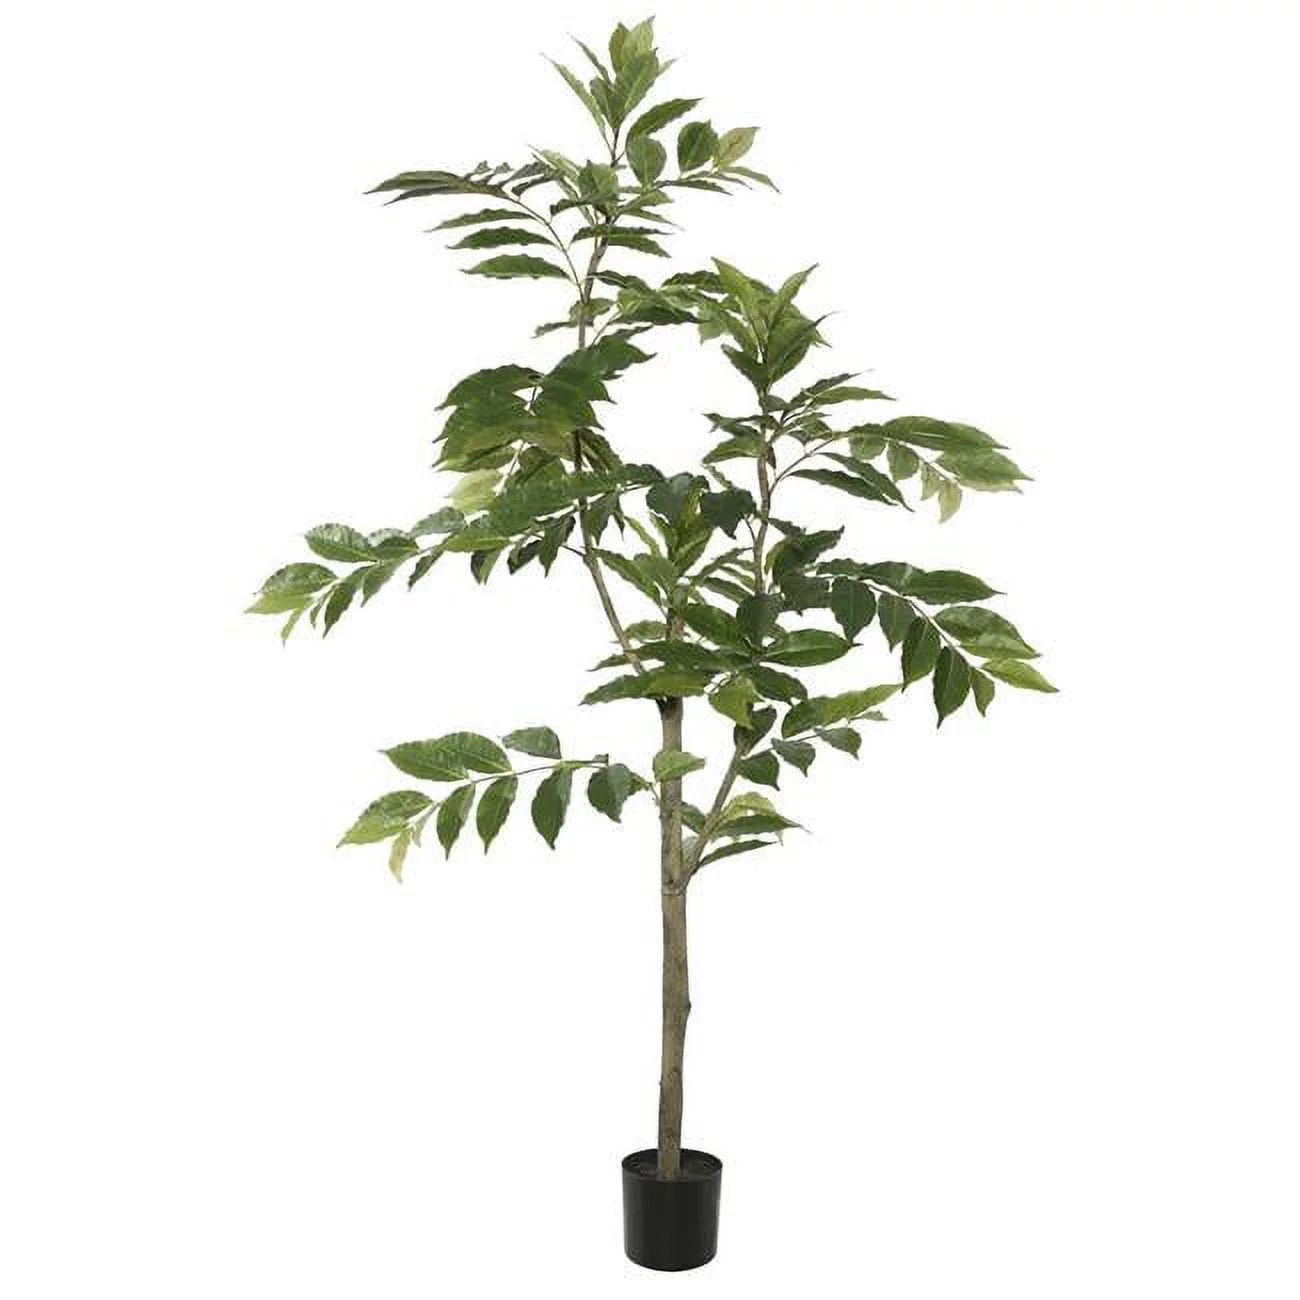 Vickerman TB170872 6 in. Potted N & Ina Tree with 284 Leave, Green | Walmart (US)